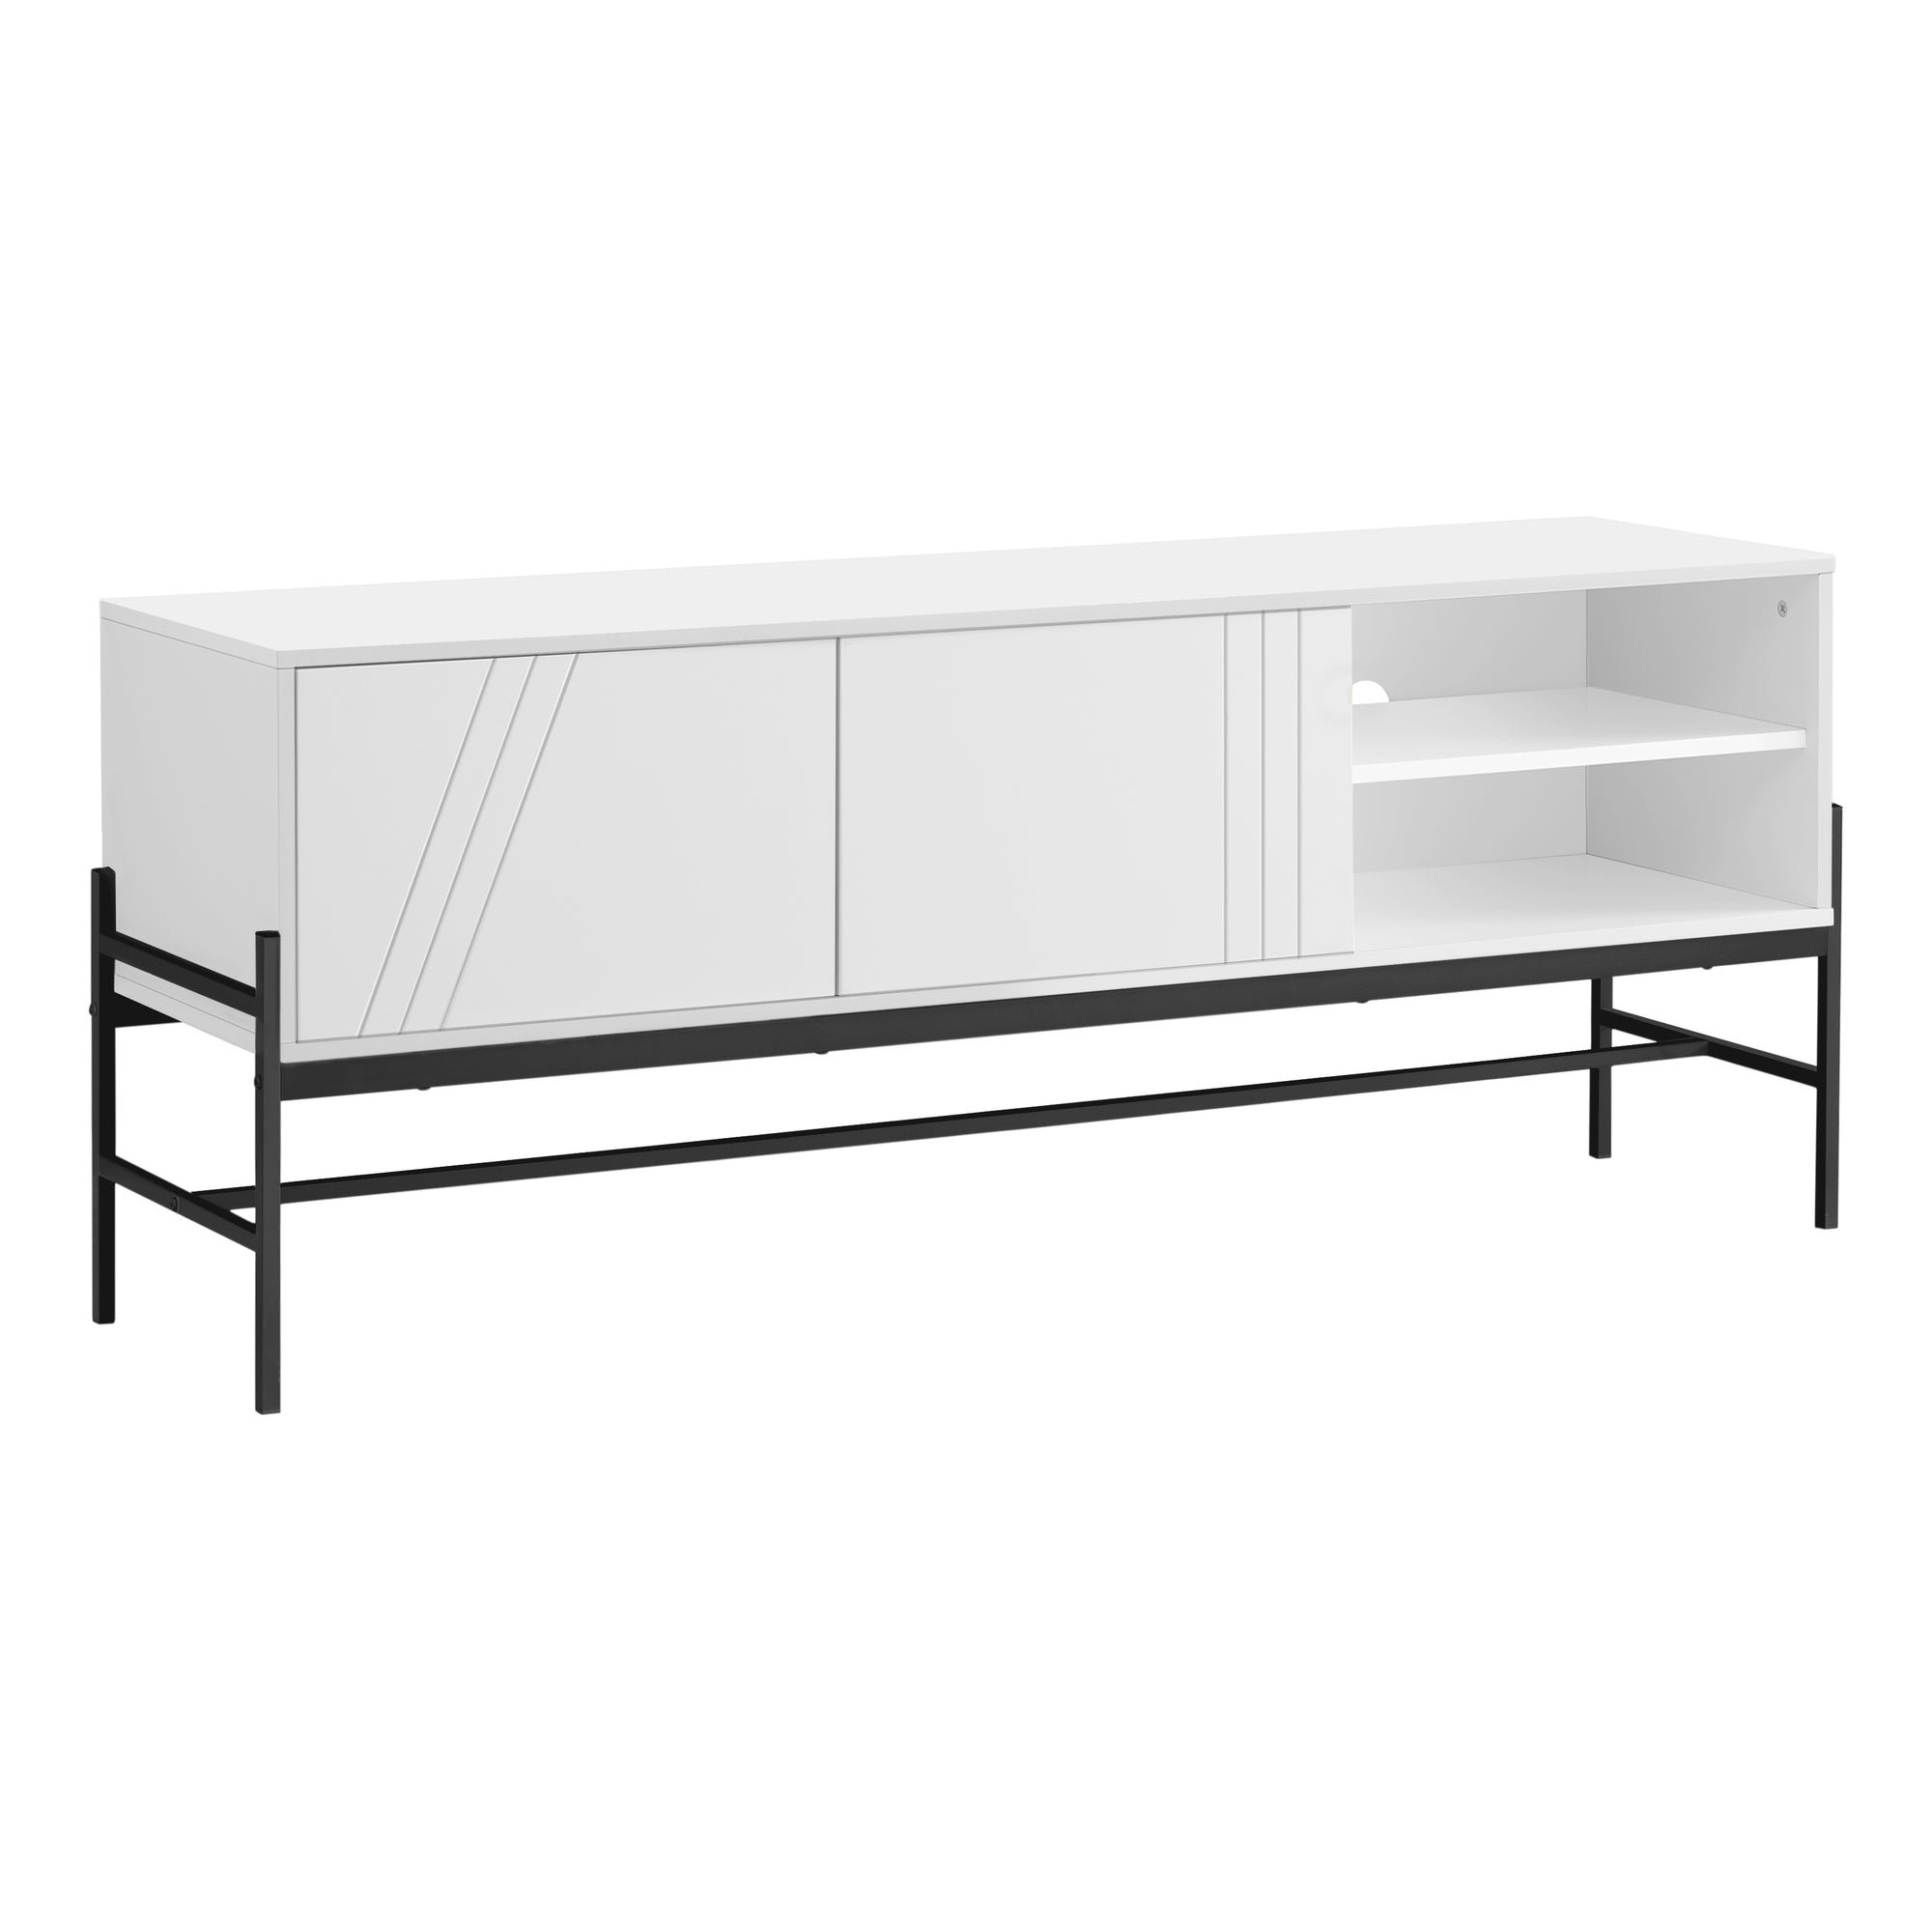 MN-652738    Tv Stand, 60 Inch, Console, Media Entertainment Center, Storage Cabinet, Living Room, Bedroom, White Laminate, Black Metal, Contemporary, Modern